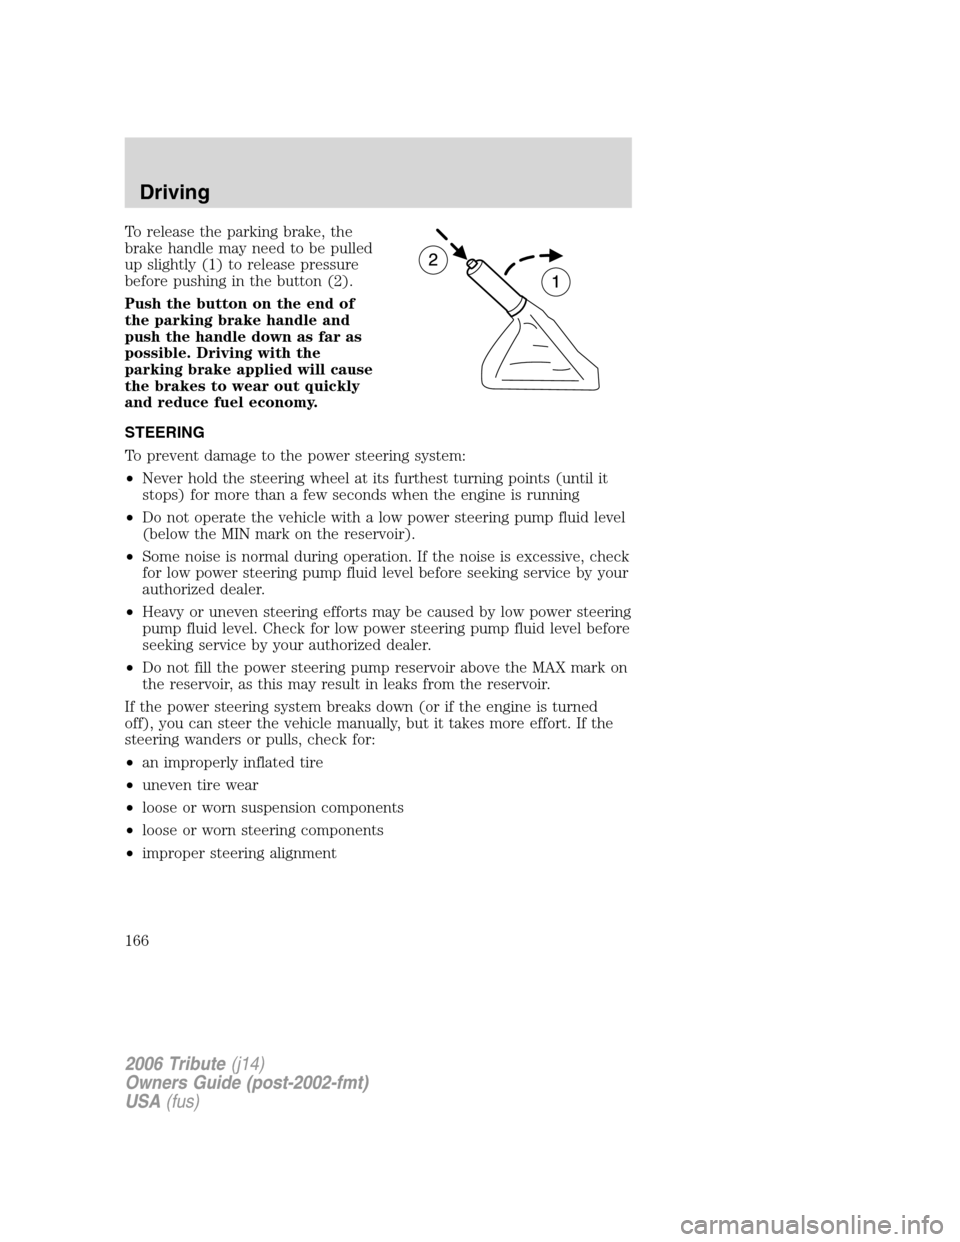 MAZDA MODEL TRIBUTE 2006  Owners Manual (in English) To release the parking brake, the
brake handle may need to be pulled
up slightly (1) to release pressure
before pushing in the button (2).
Push the button on the end of
the parking brake handle and
pu